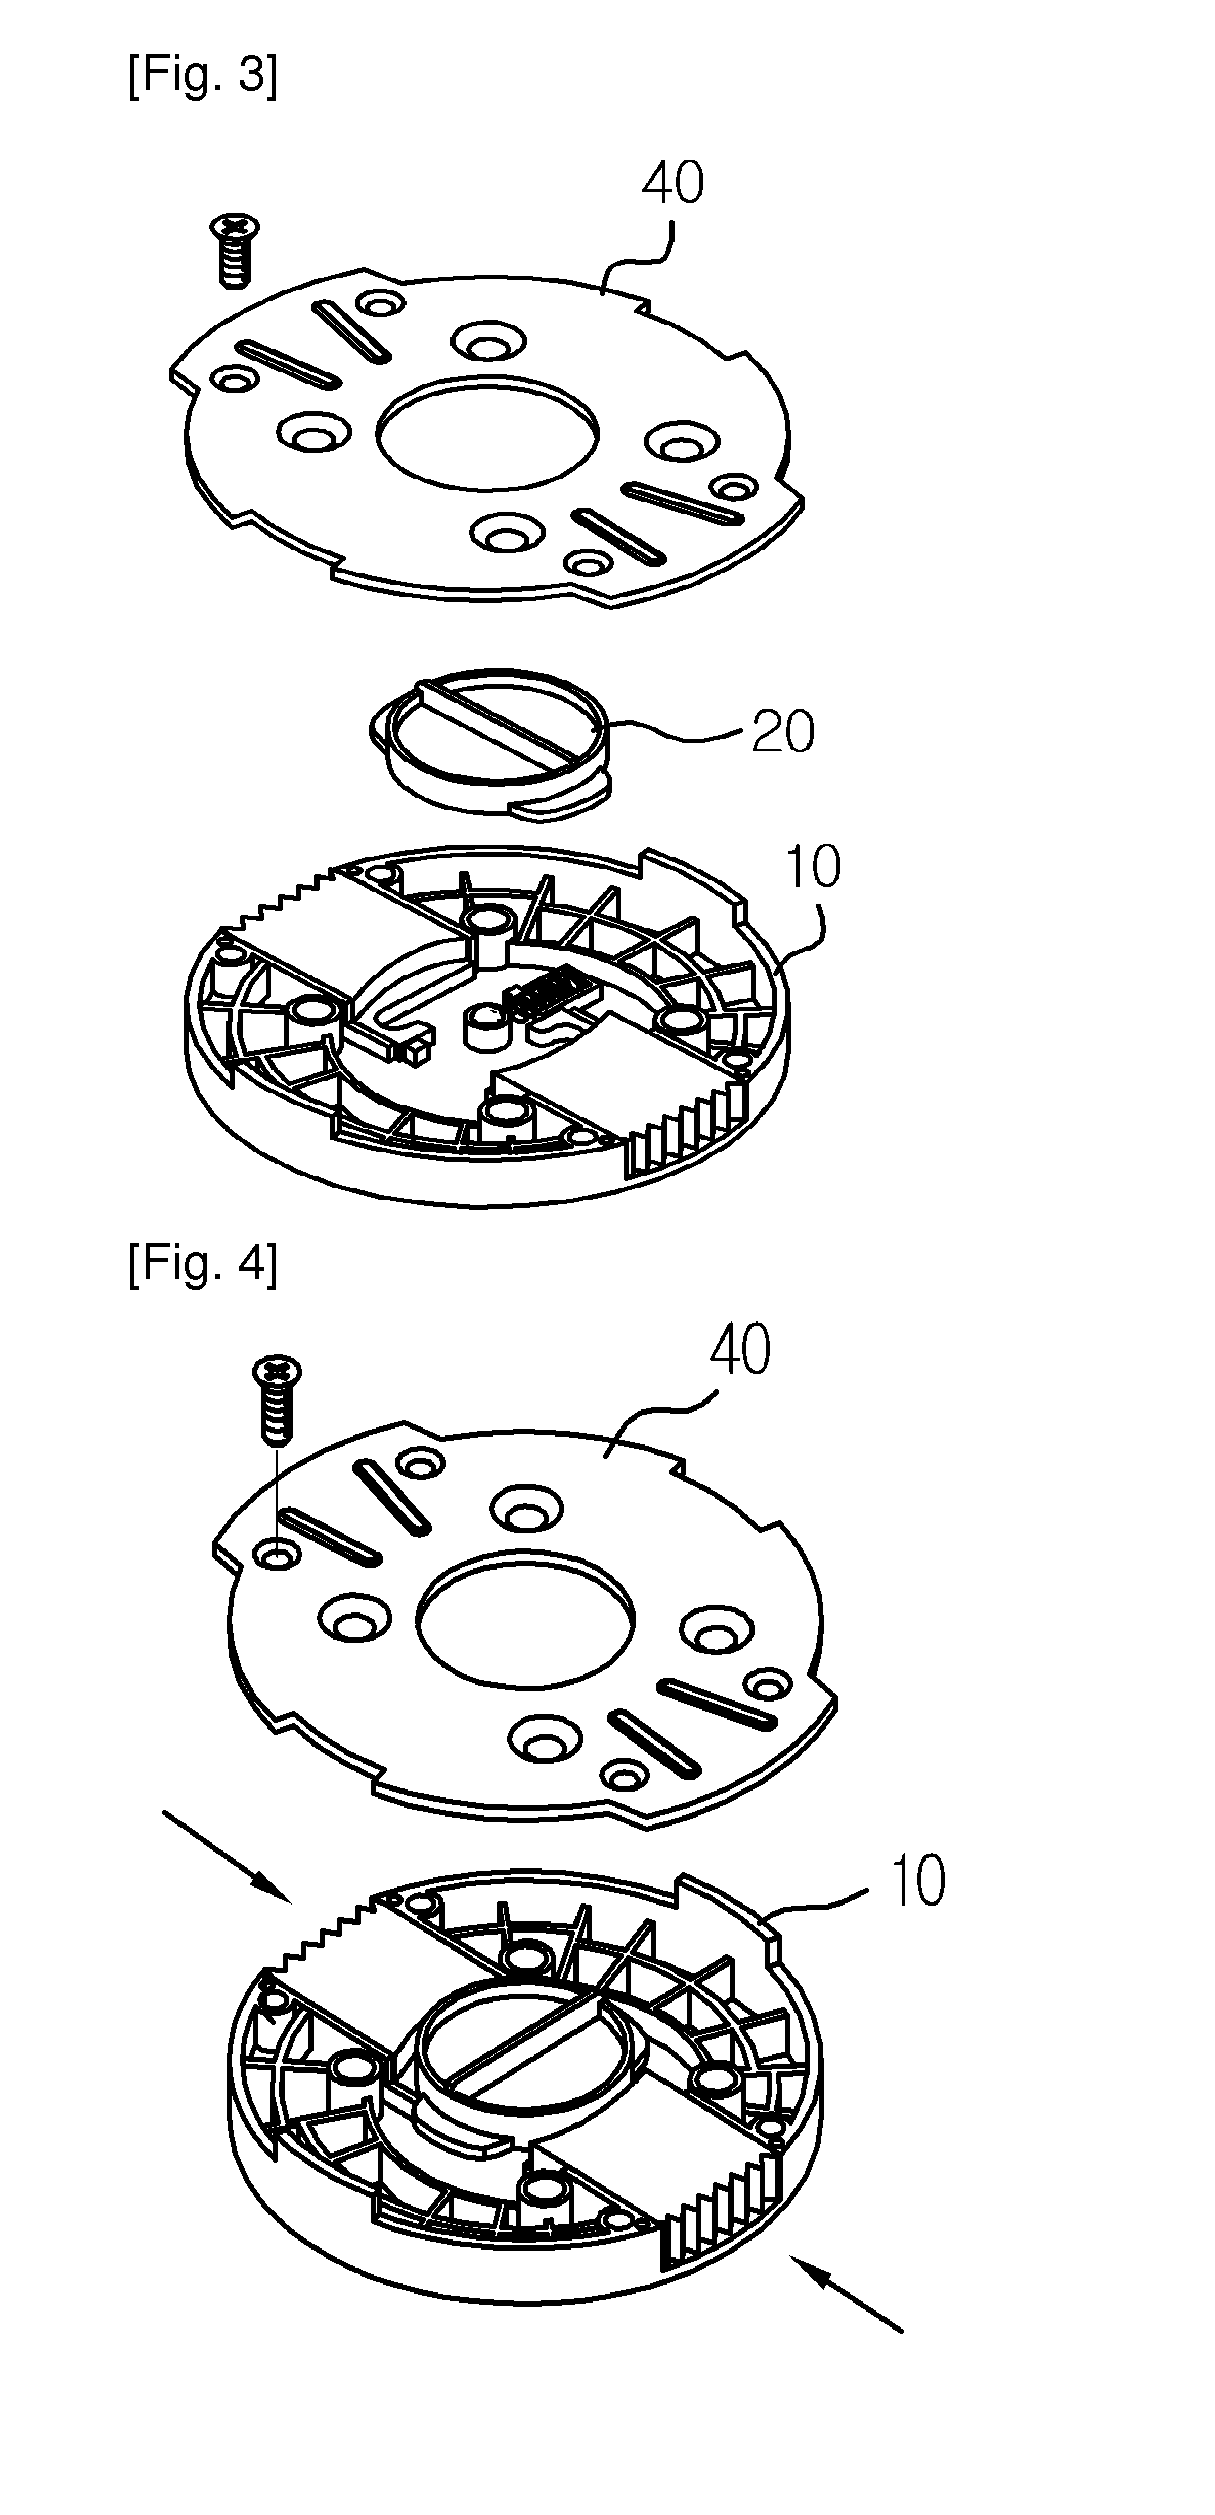 Disk for controlling an angle of binding in snowboard